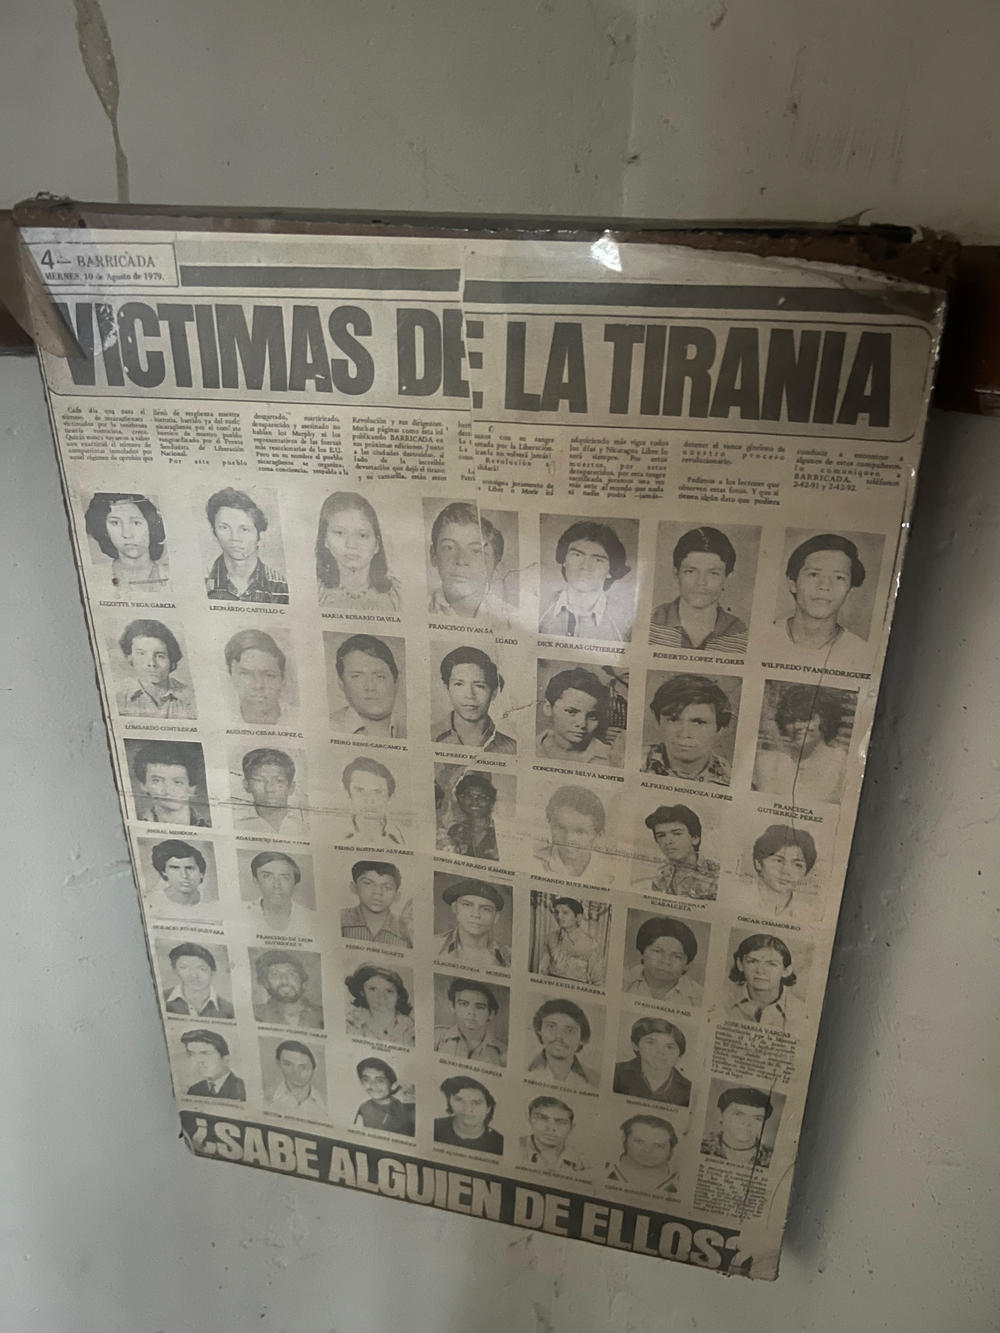 A museum to the Nicaraguan revolution condemns the abuses of the Somoza dictatorship. This is an issue of the old Sandinista newspaper displaying the 